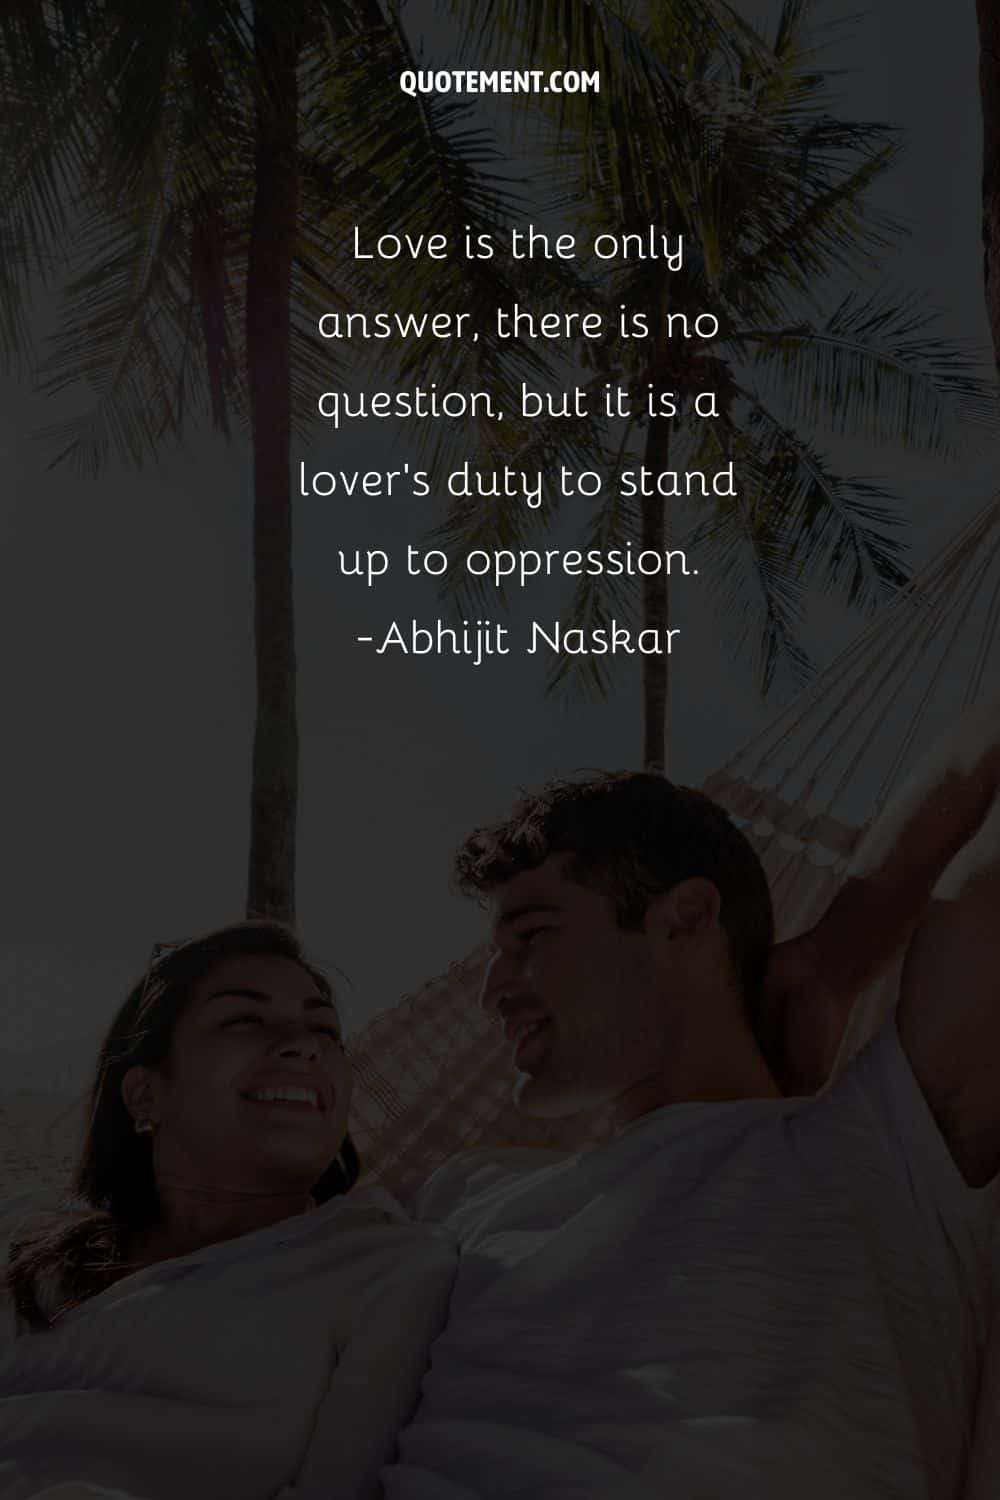 Love is the only answer, there is no question, but it is a lover's duty to stand up to oppression